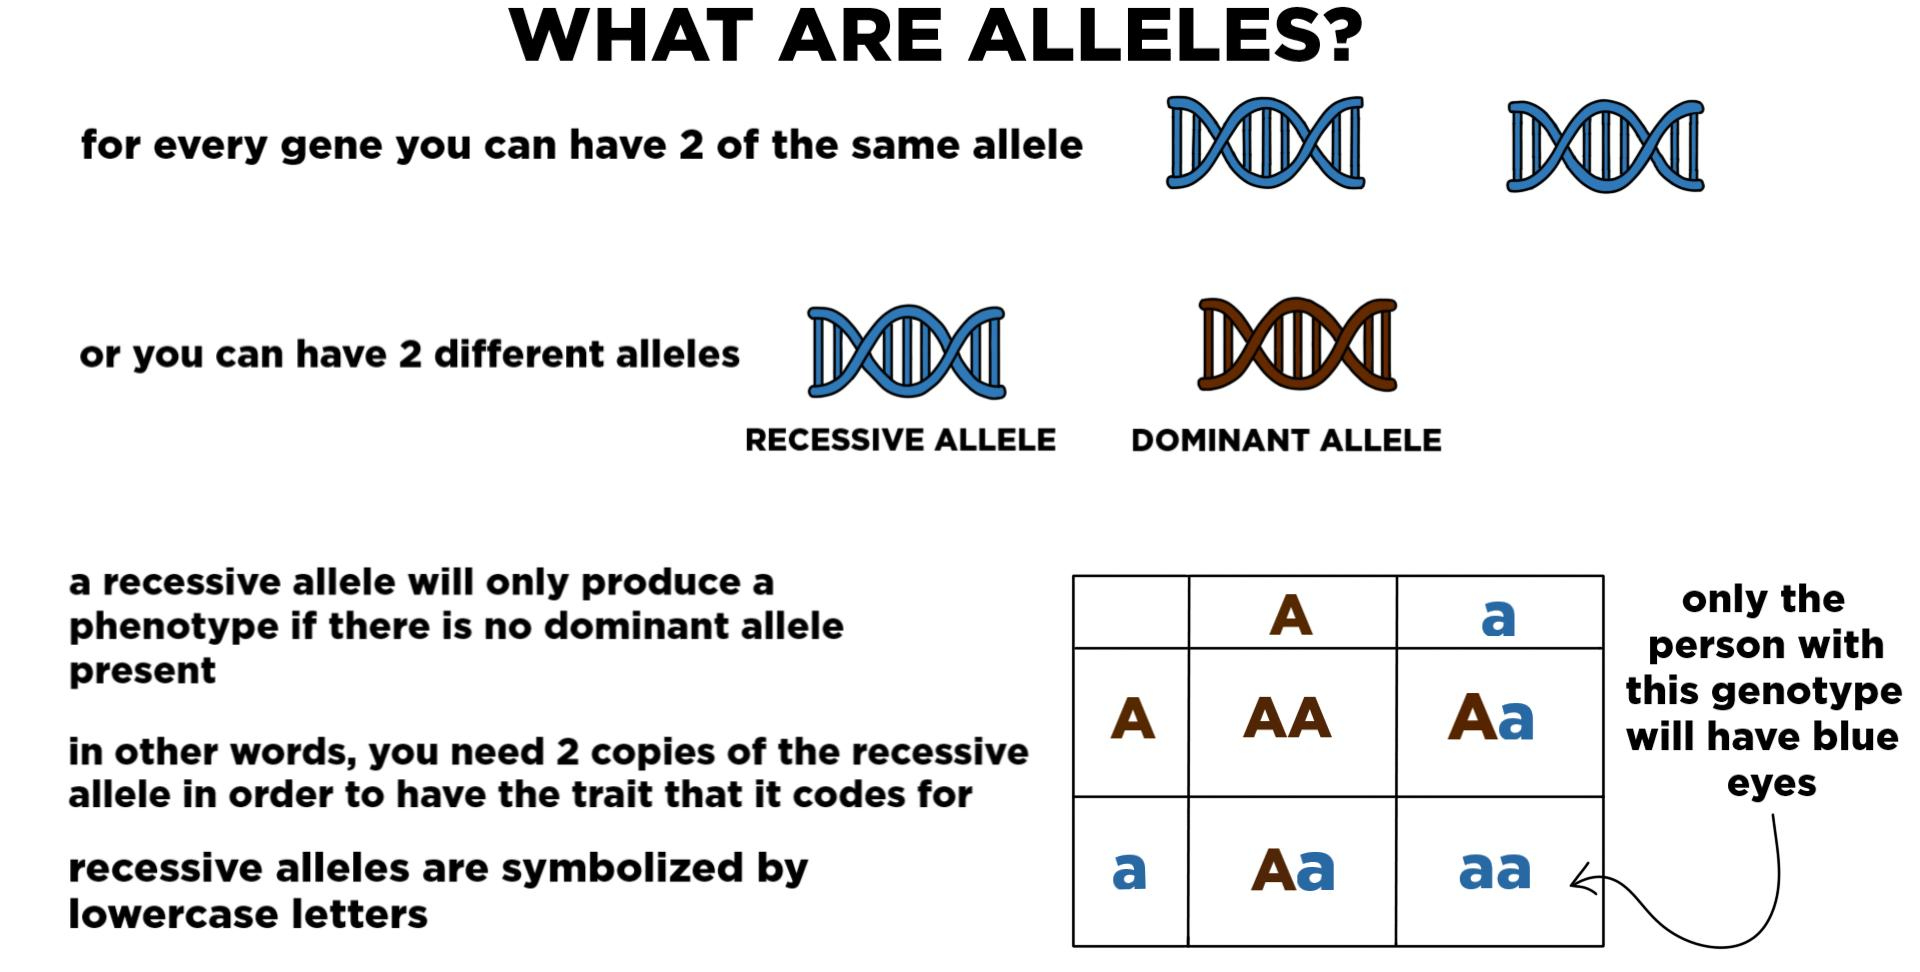 <p>Allele that is often hidden or overshadowed by dominant allele</p>